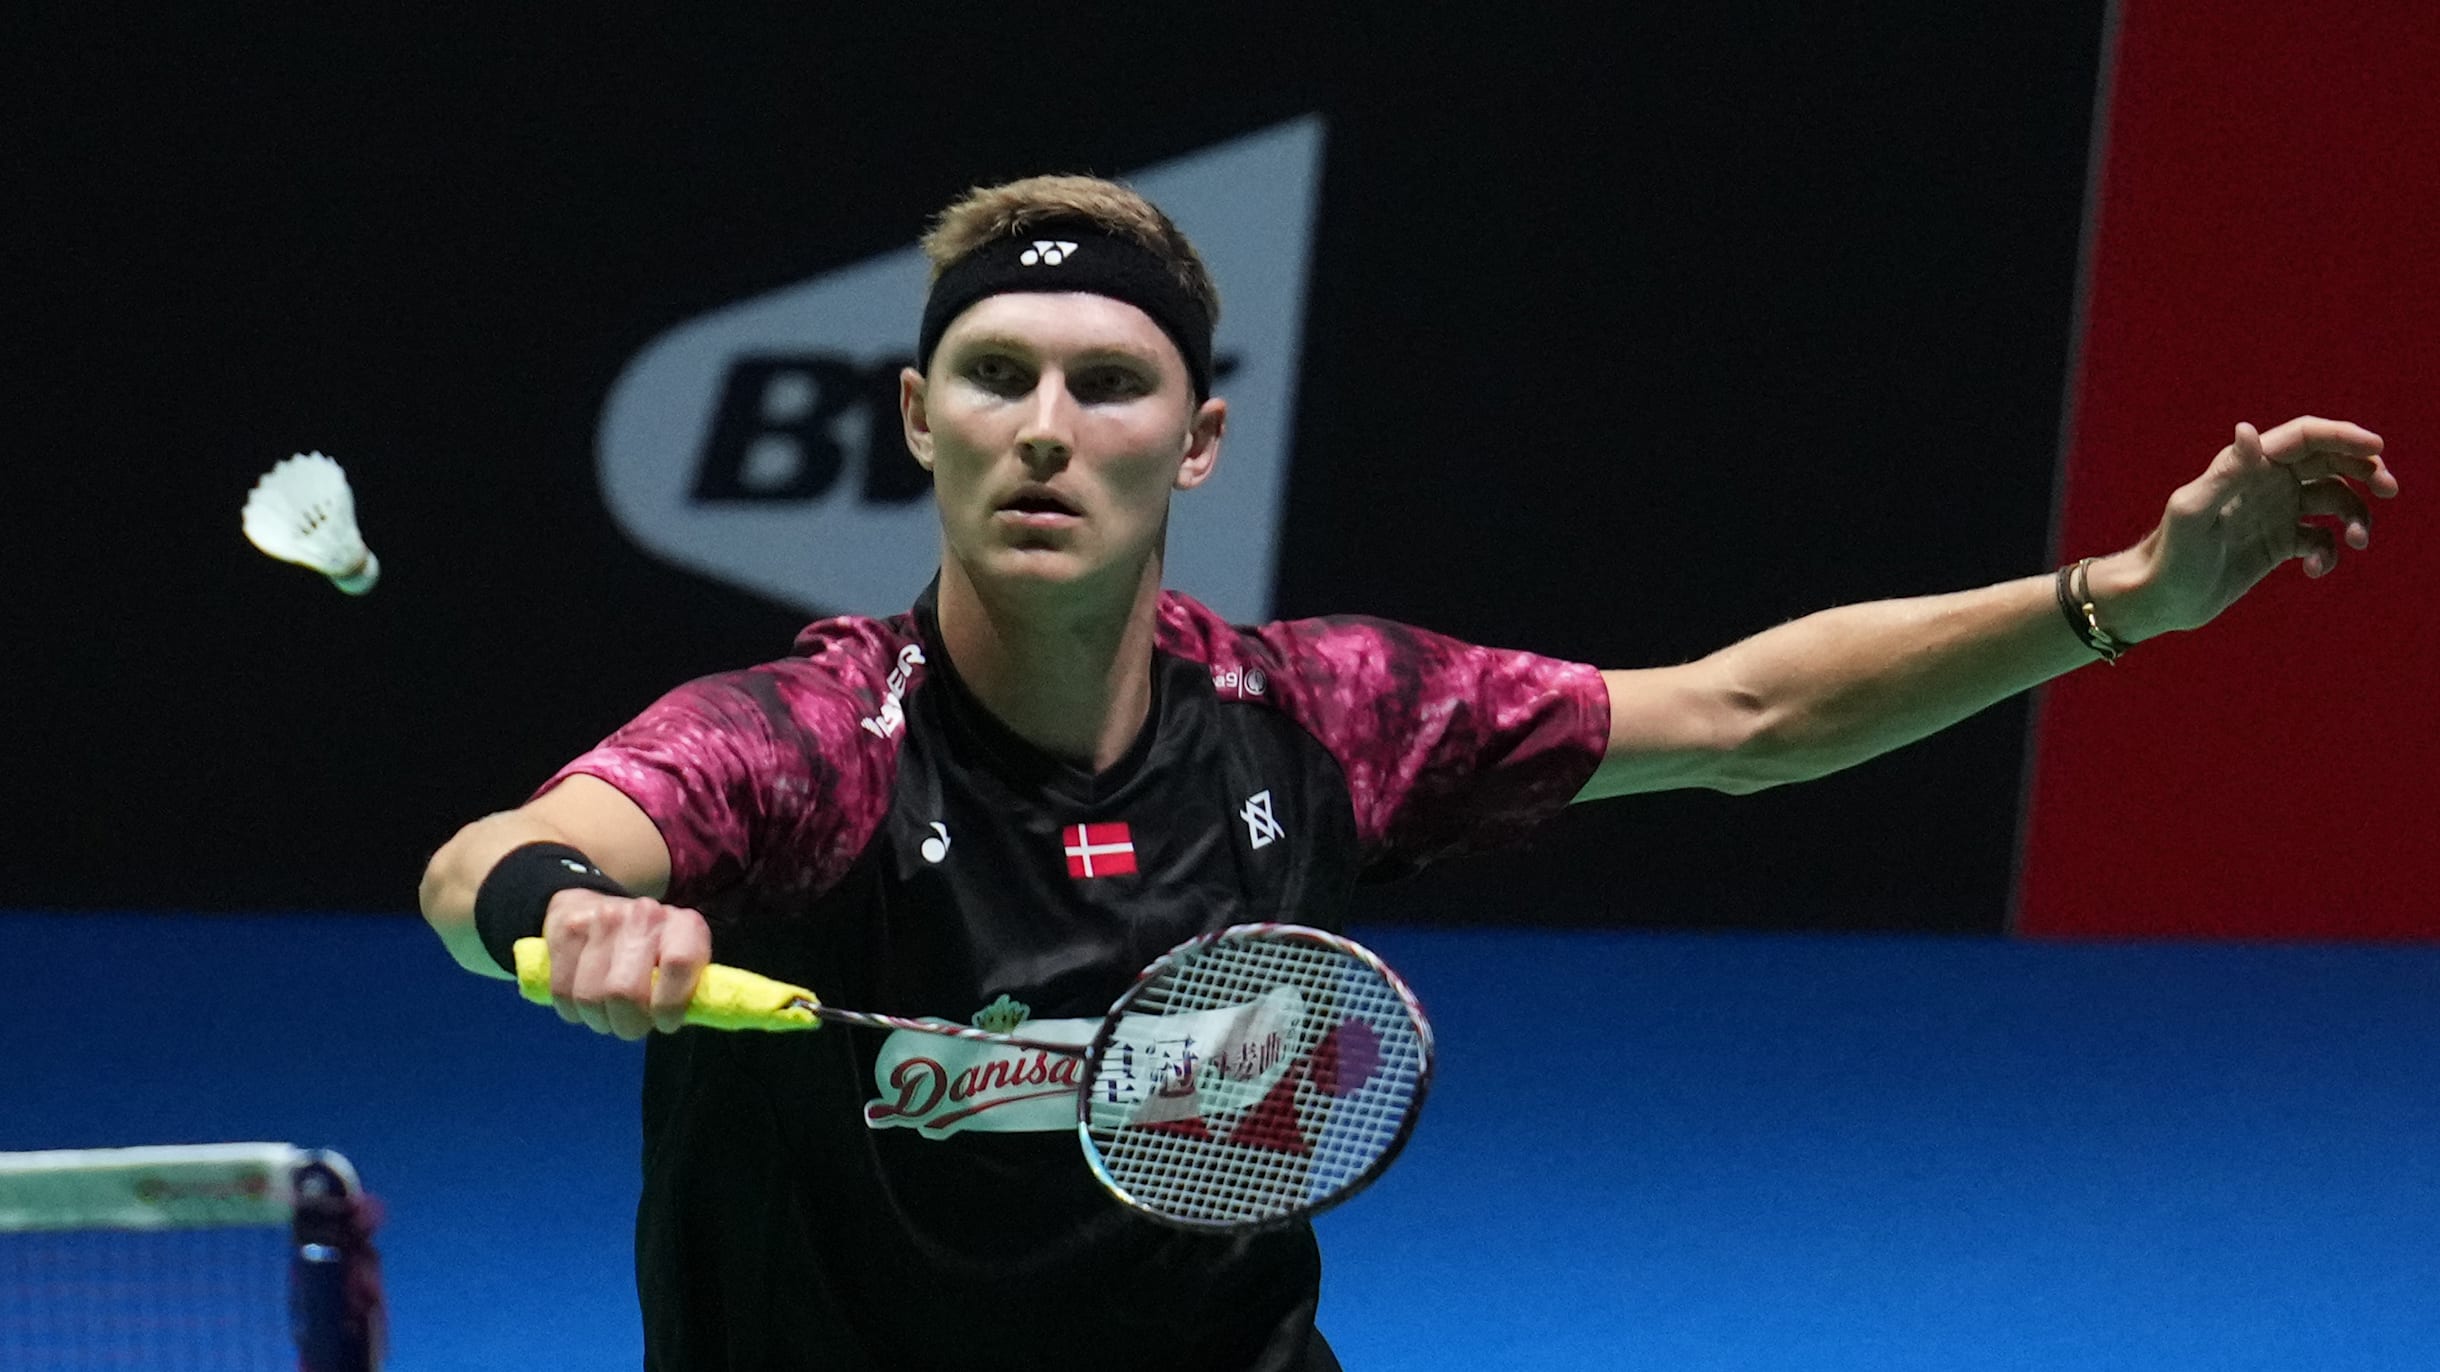 Denmark Open badminton 2022 Round one action featuring Viktor Axelsen, Anders Antonsen, Anthony Ginting